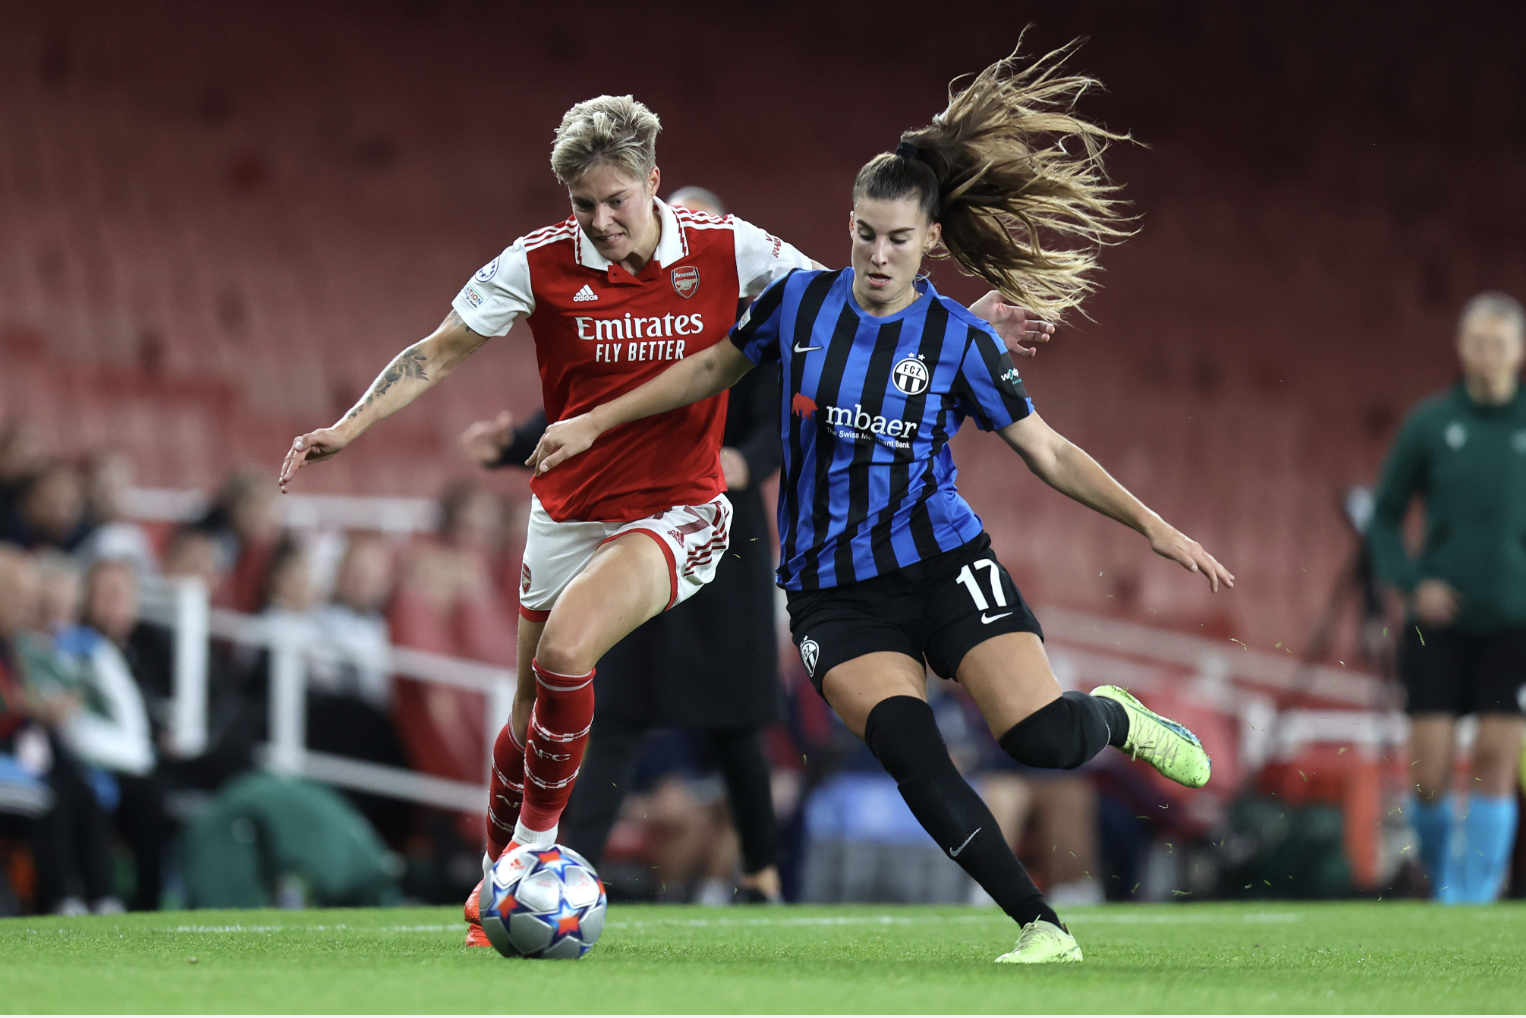 Preview: Arsenal Women take on Paris FC for place in Round 2 of Champions League qualifying